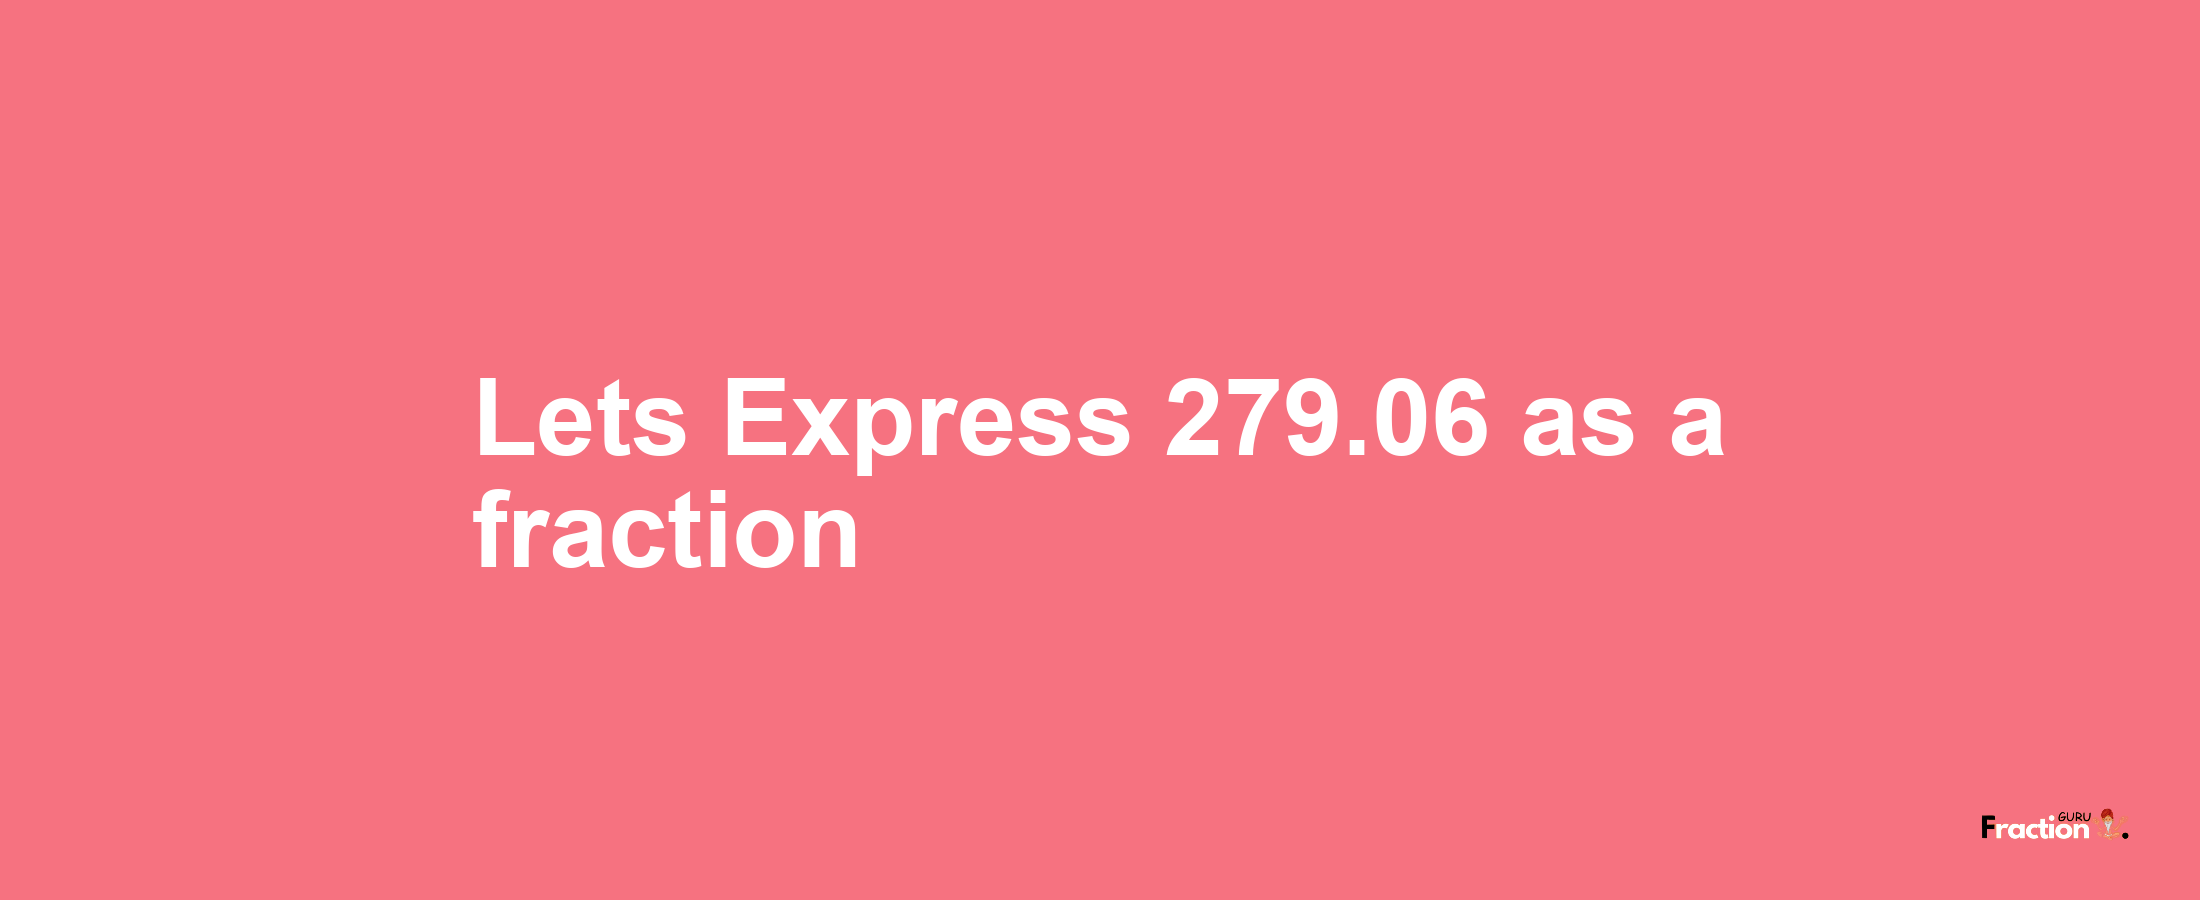 Lets Express 279.06 as afraction